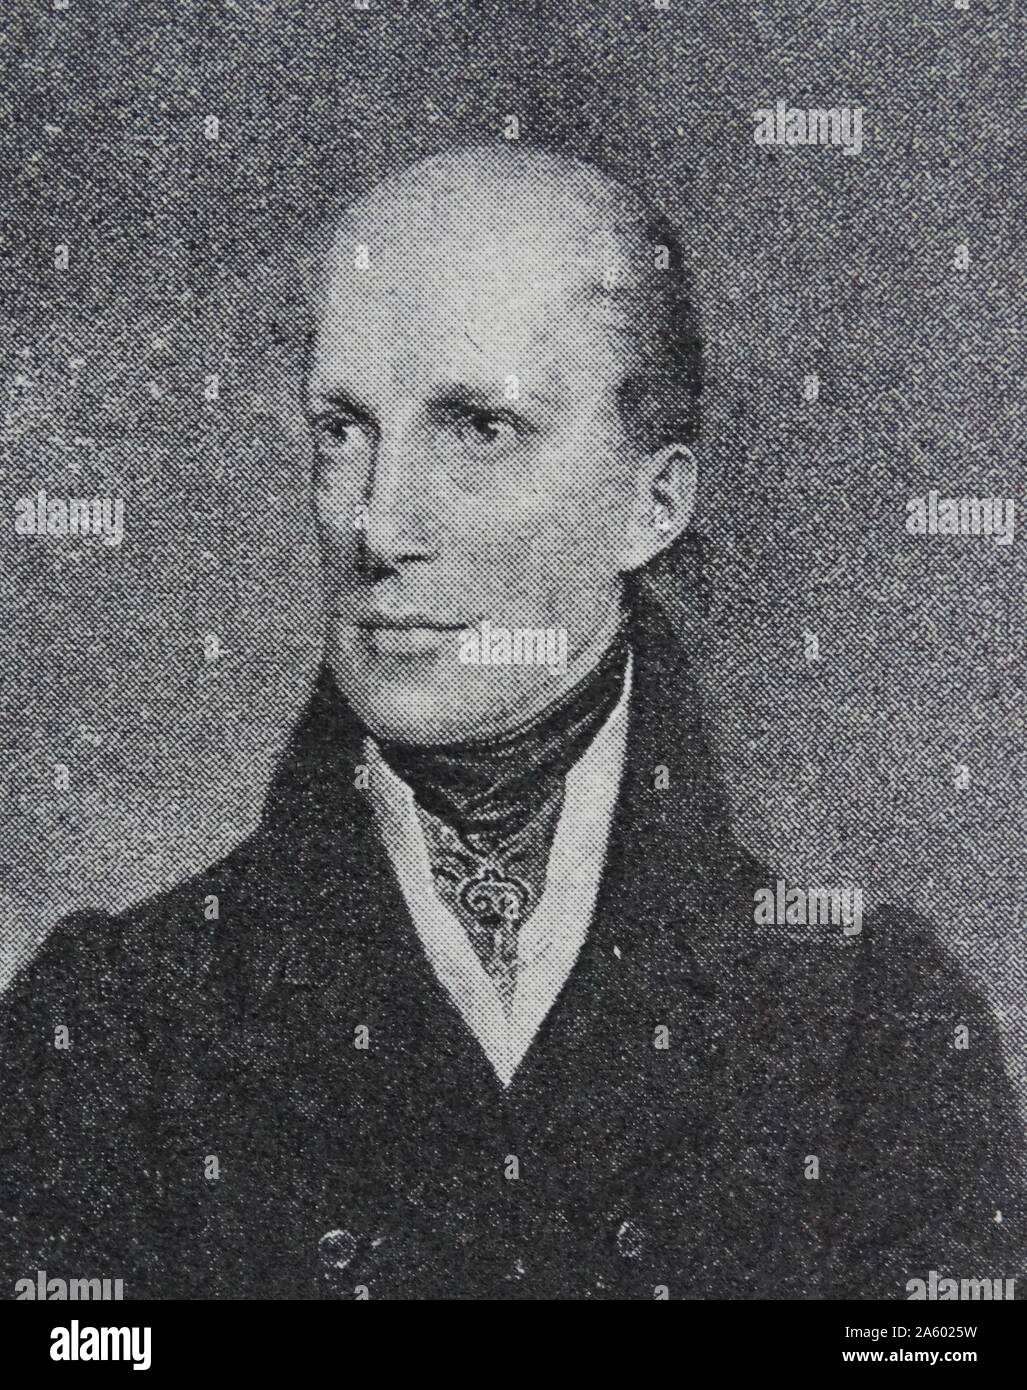 Archduke John of Austria (1782 – 1859), member of the House of Habsburg-Lorraine, was an Austrian field marshal and German Imperial regent (Reichsverweser) during the Revolutions of 1848. Stock Photo